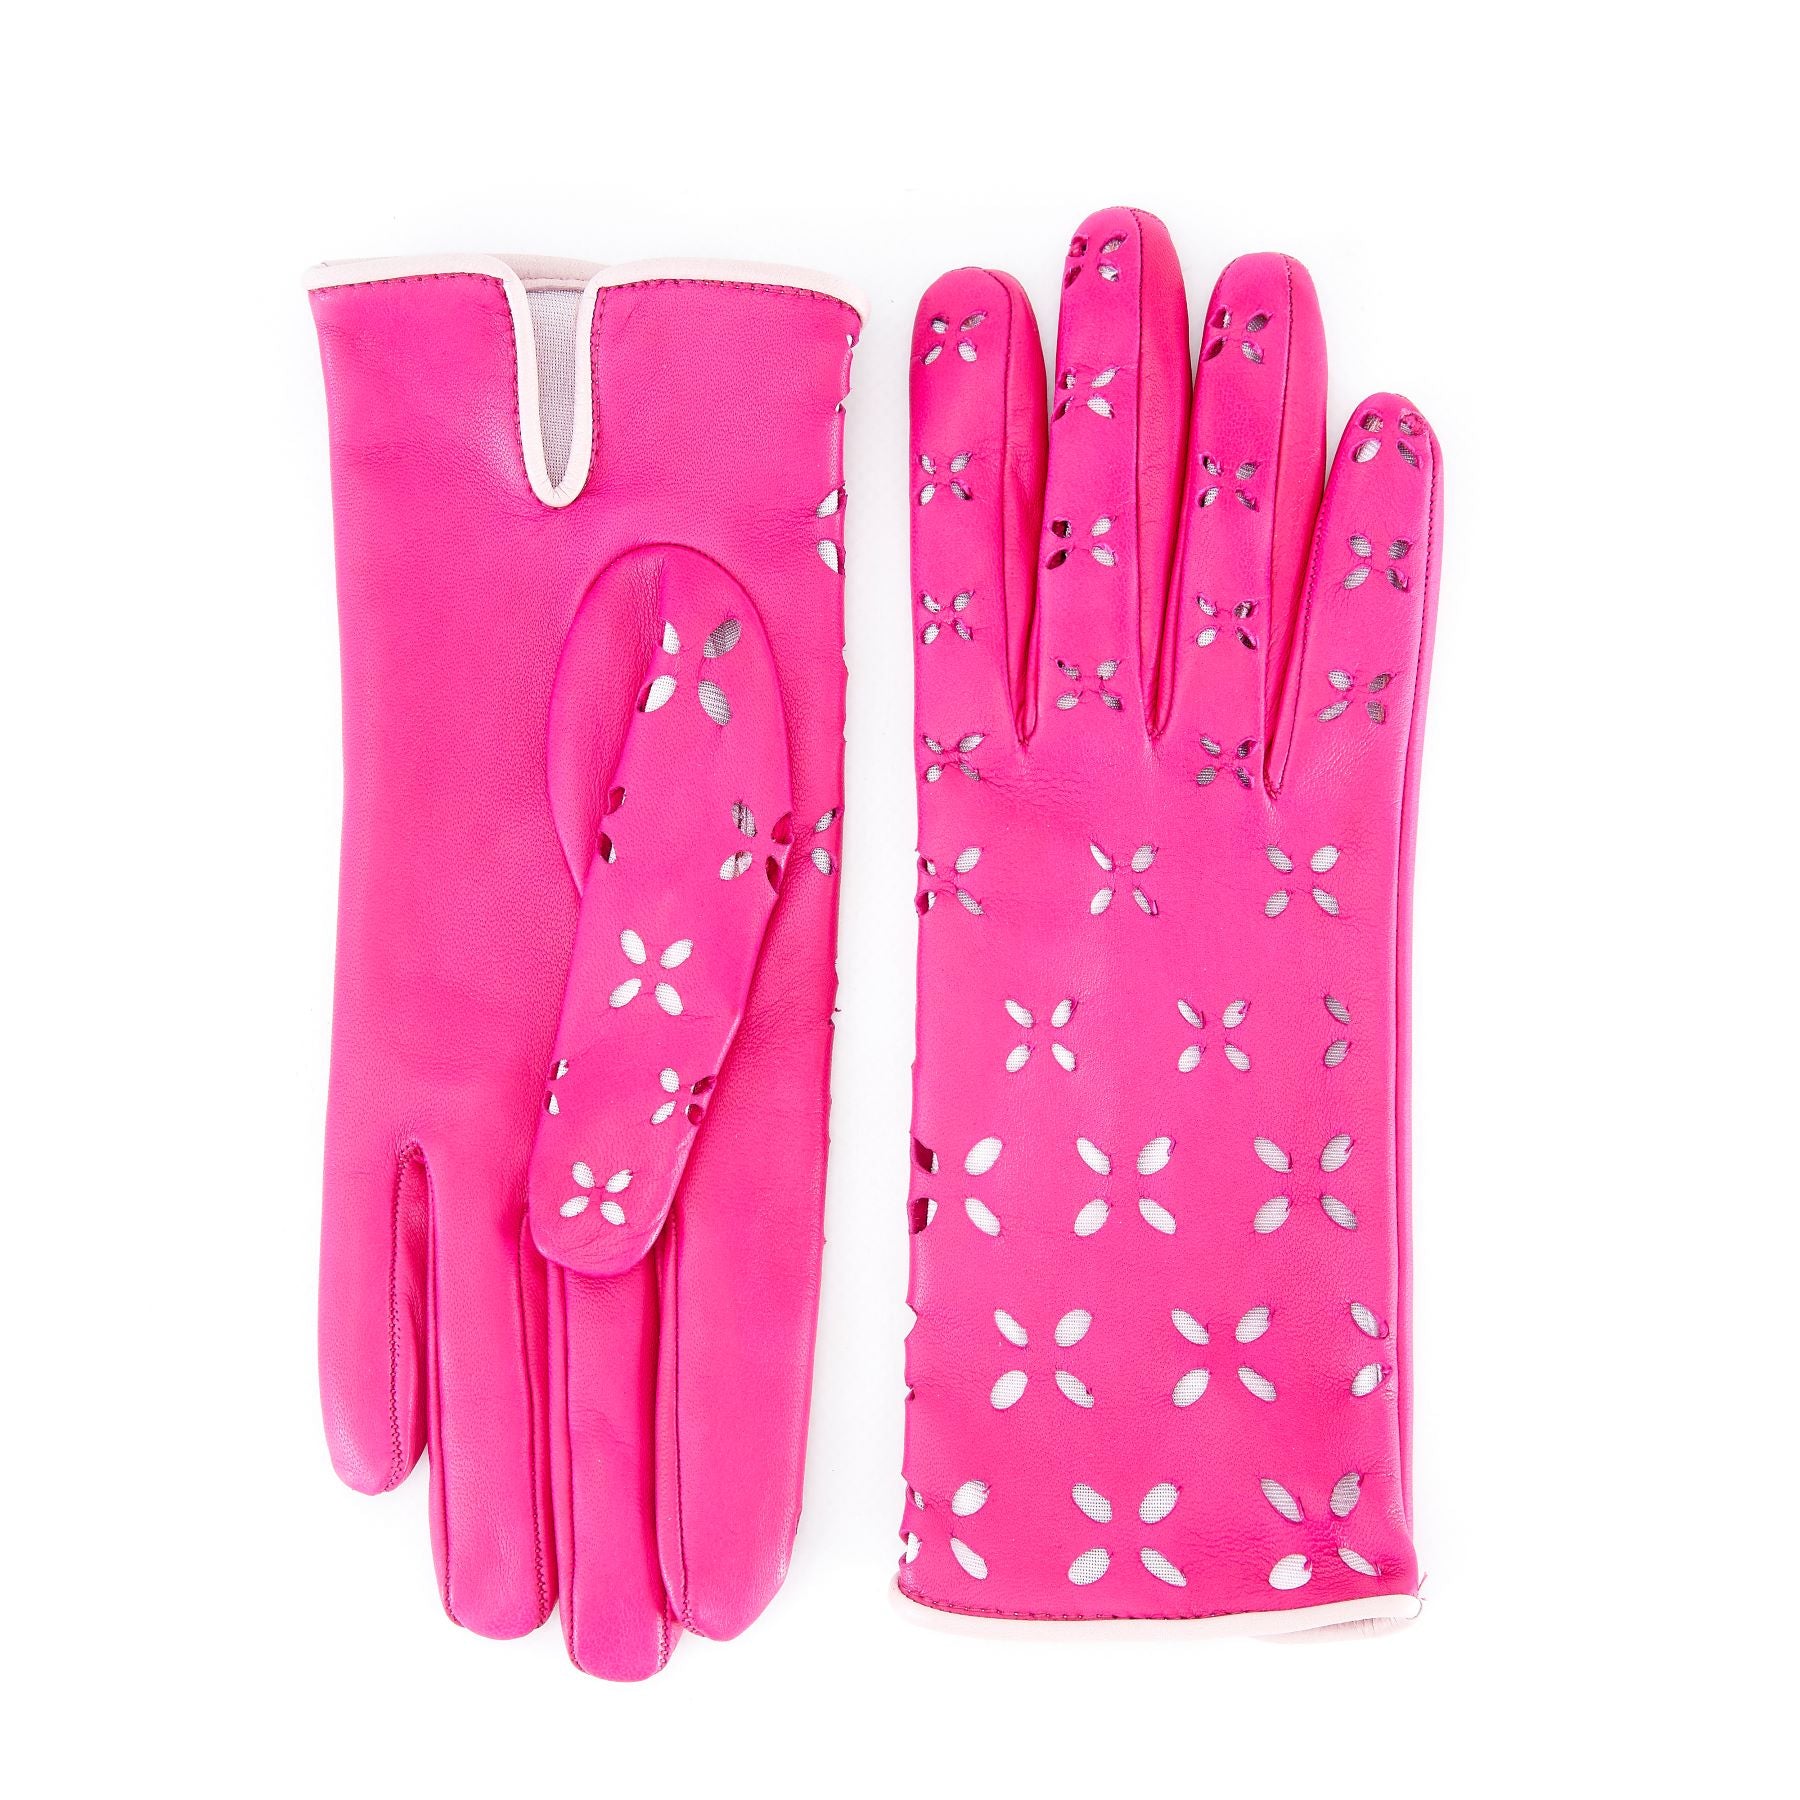 Women's pink nappa leather gloves with laser cut petals detail and polyamide lining